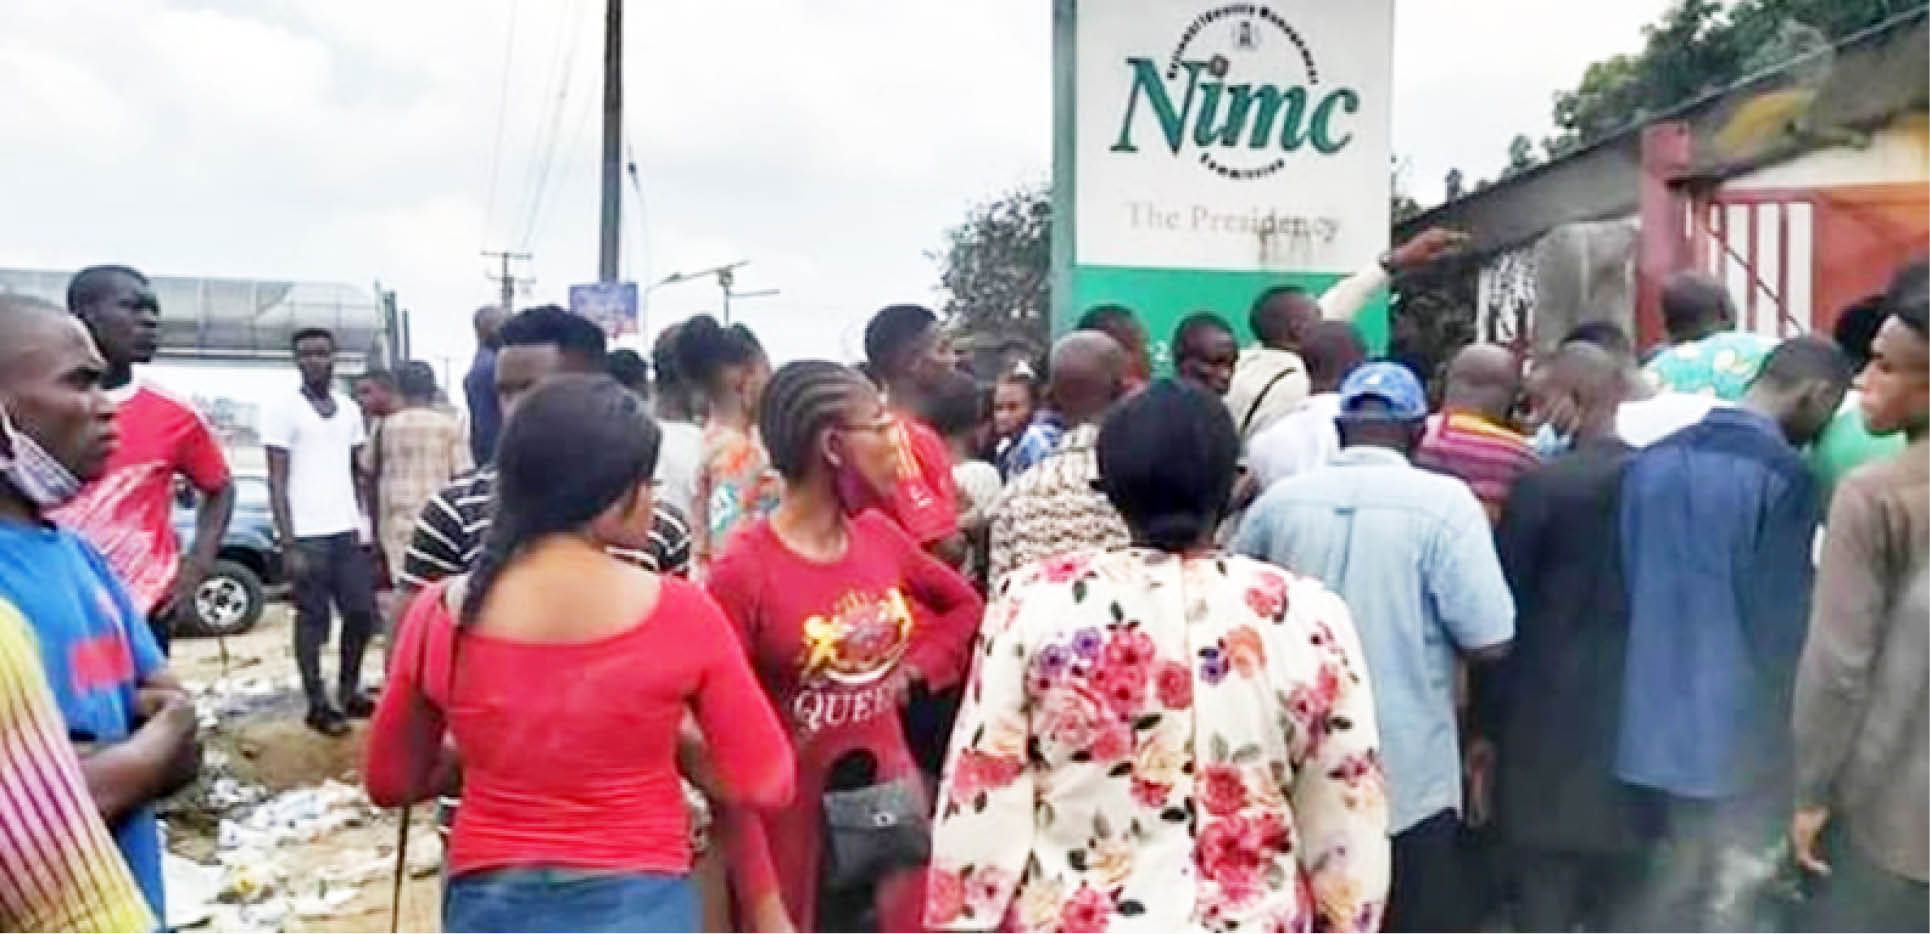 People stranded at the Rivers State NIMC office